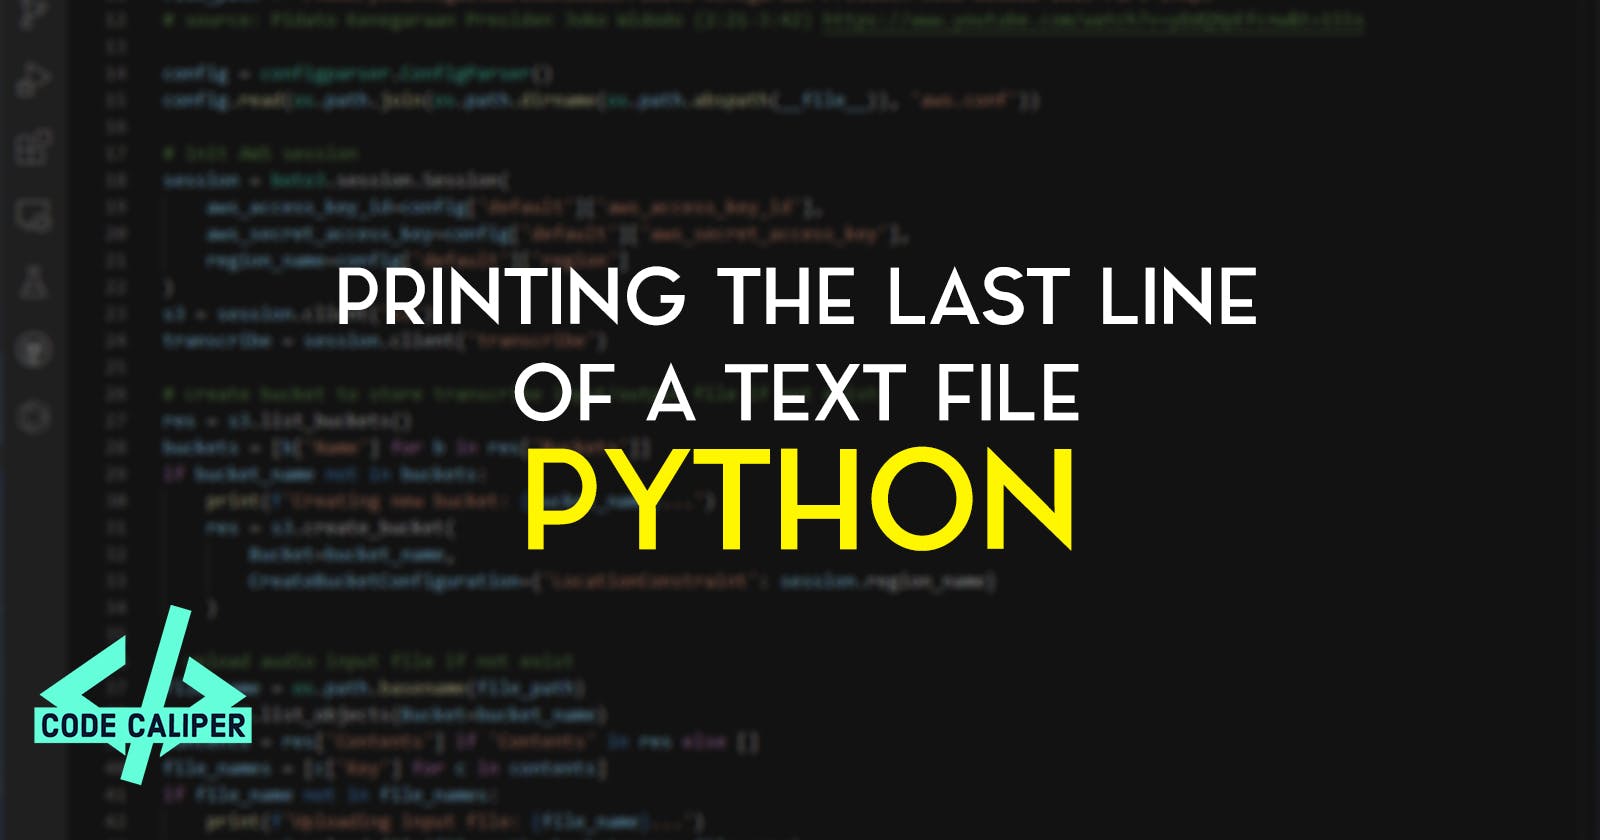 Printing the Last Line of a Text File in Python